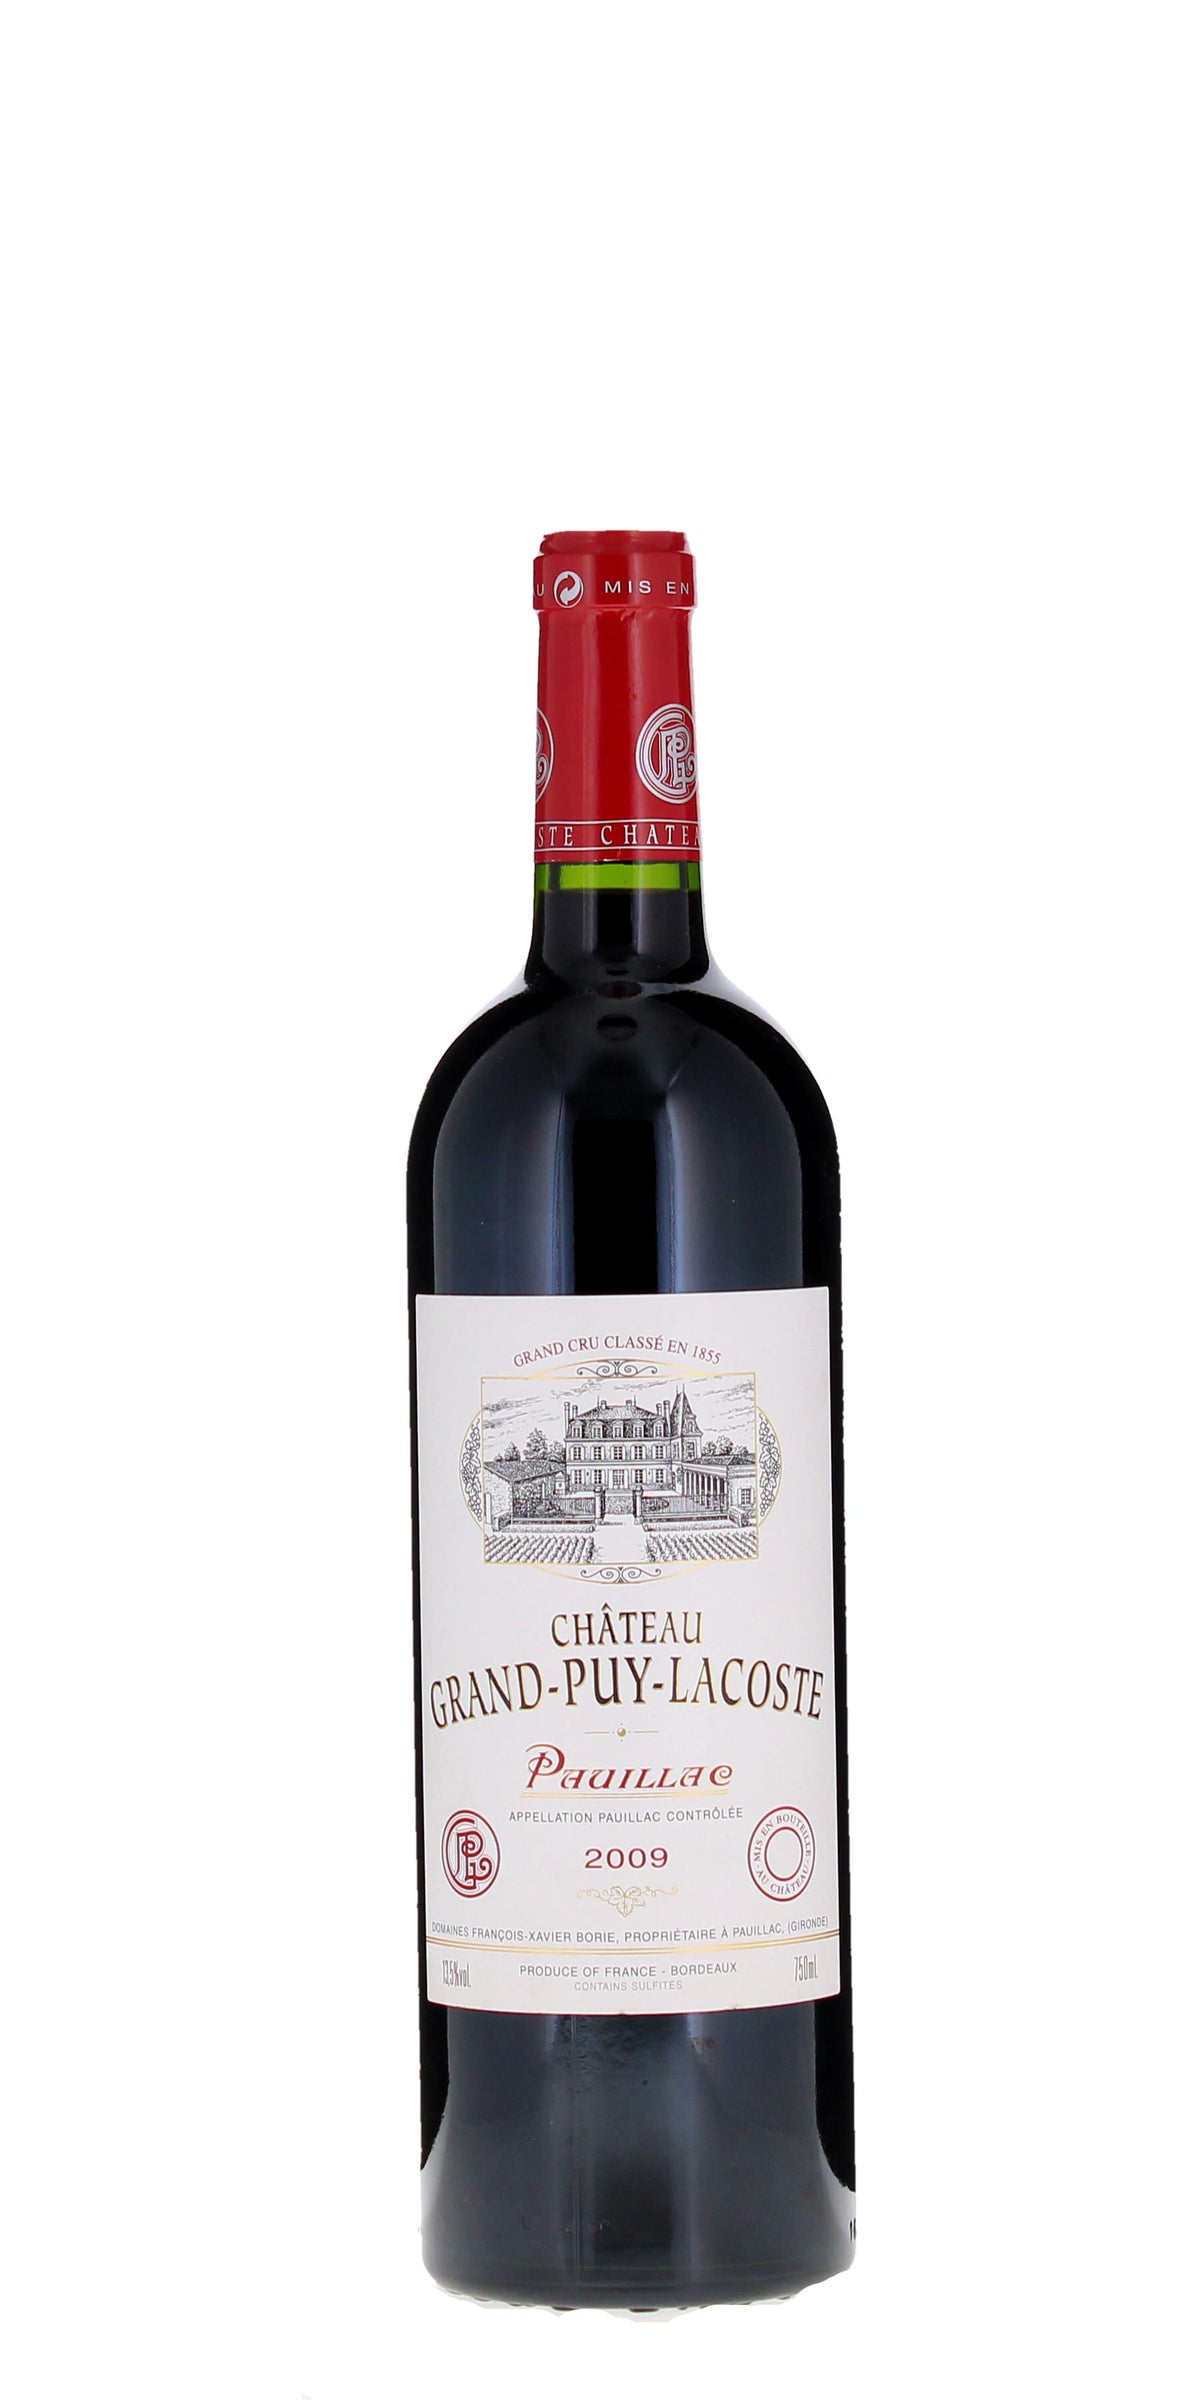 Chateau Grand-Puy-Lacoste, Pauillac, 2009